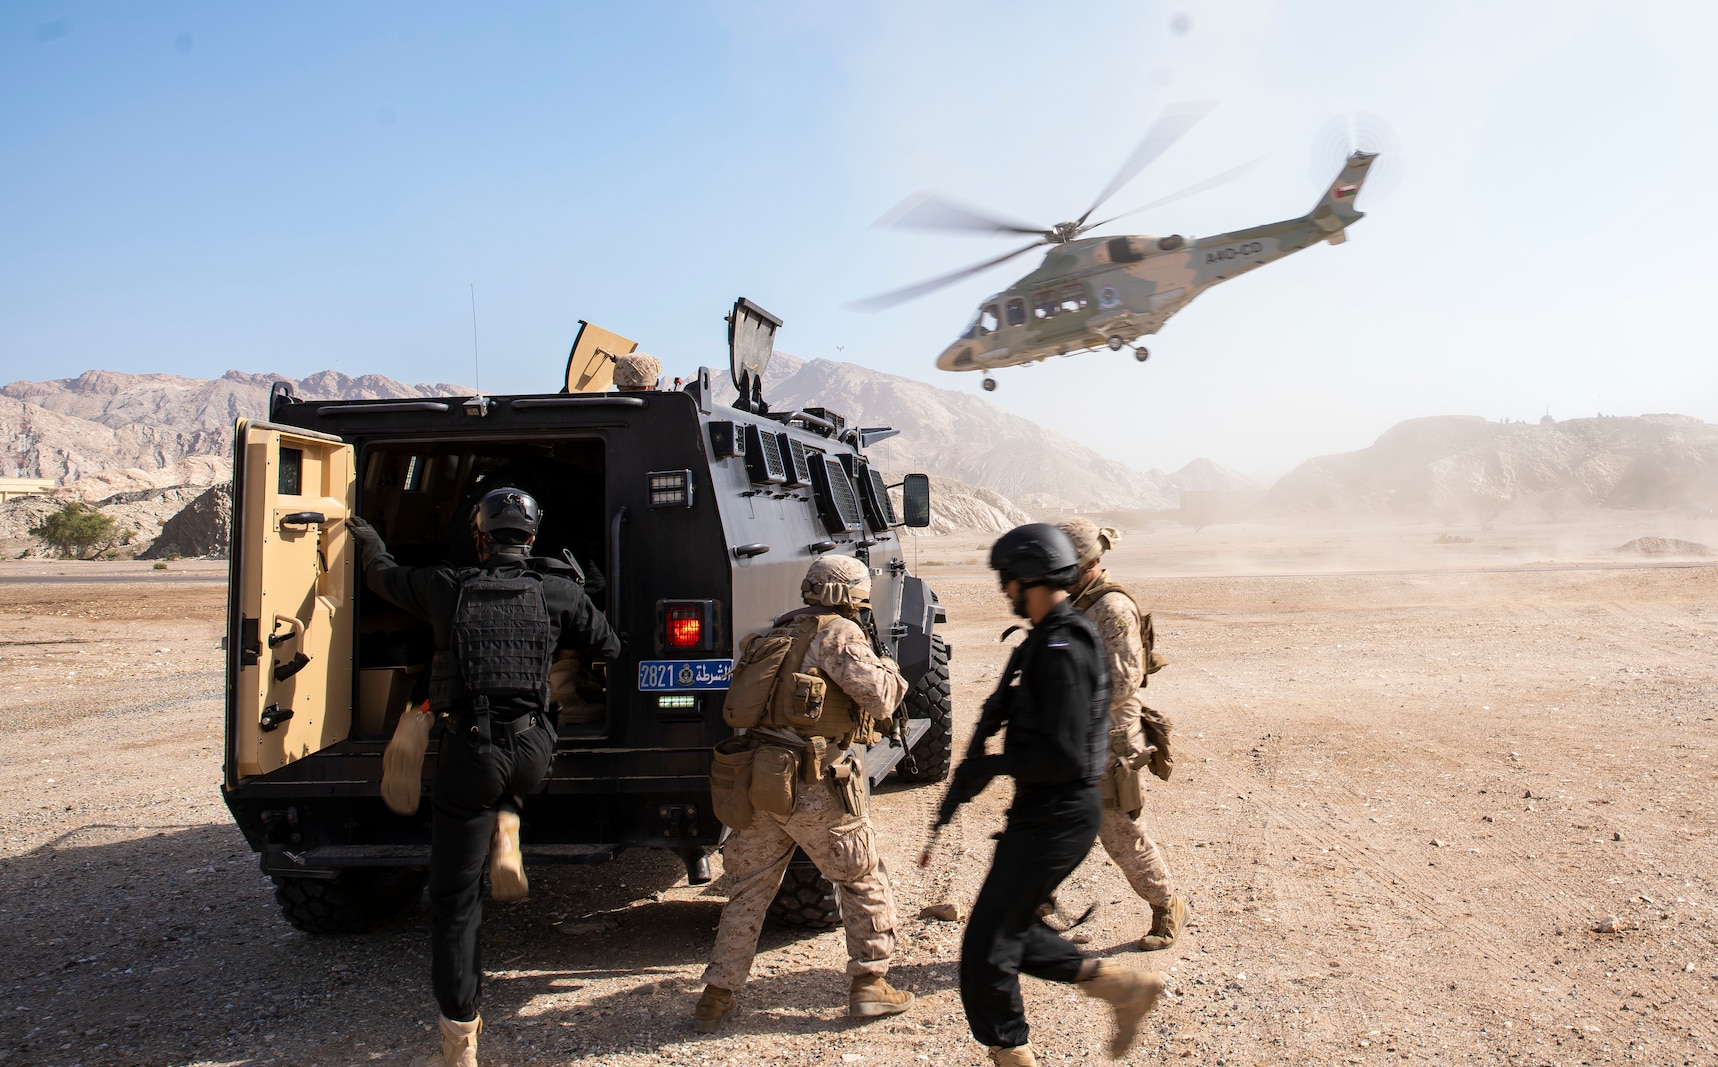 OMAN (February 23, 2023) – U.S. Marines assigned to Fleet Anti-Terrorism Security Team Central Command (FASTCENT) and members of the Royal Oman Police Special Task unit conduct CASEVAC Interoperability Training